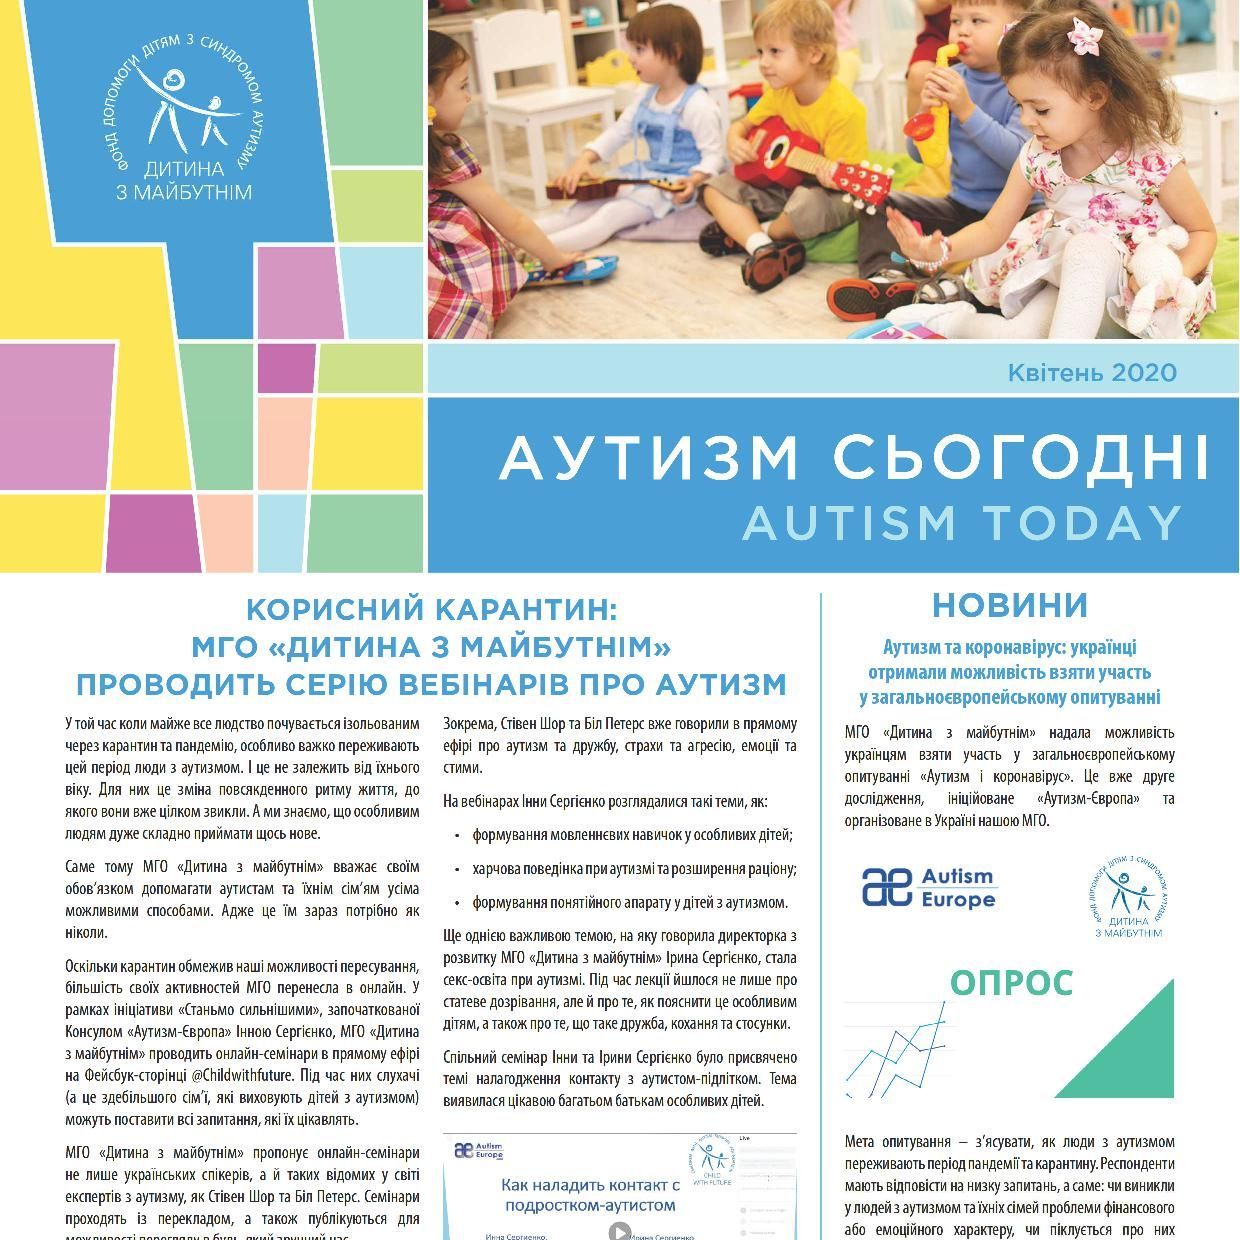 Useful webinars, a unique report and interview by Marina Poroshenko in the new issue of “Autism Today”